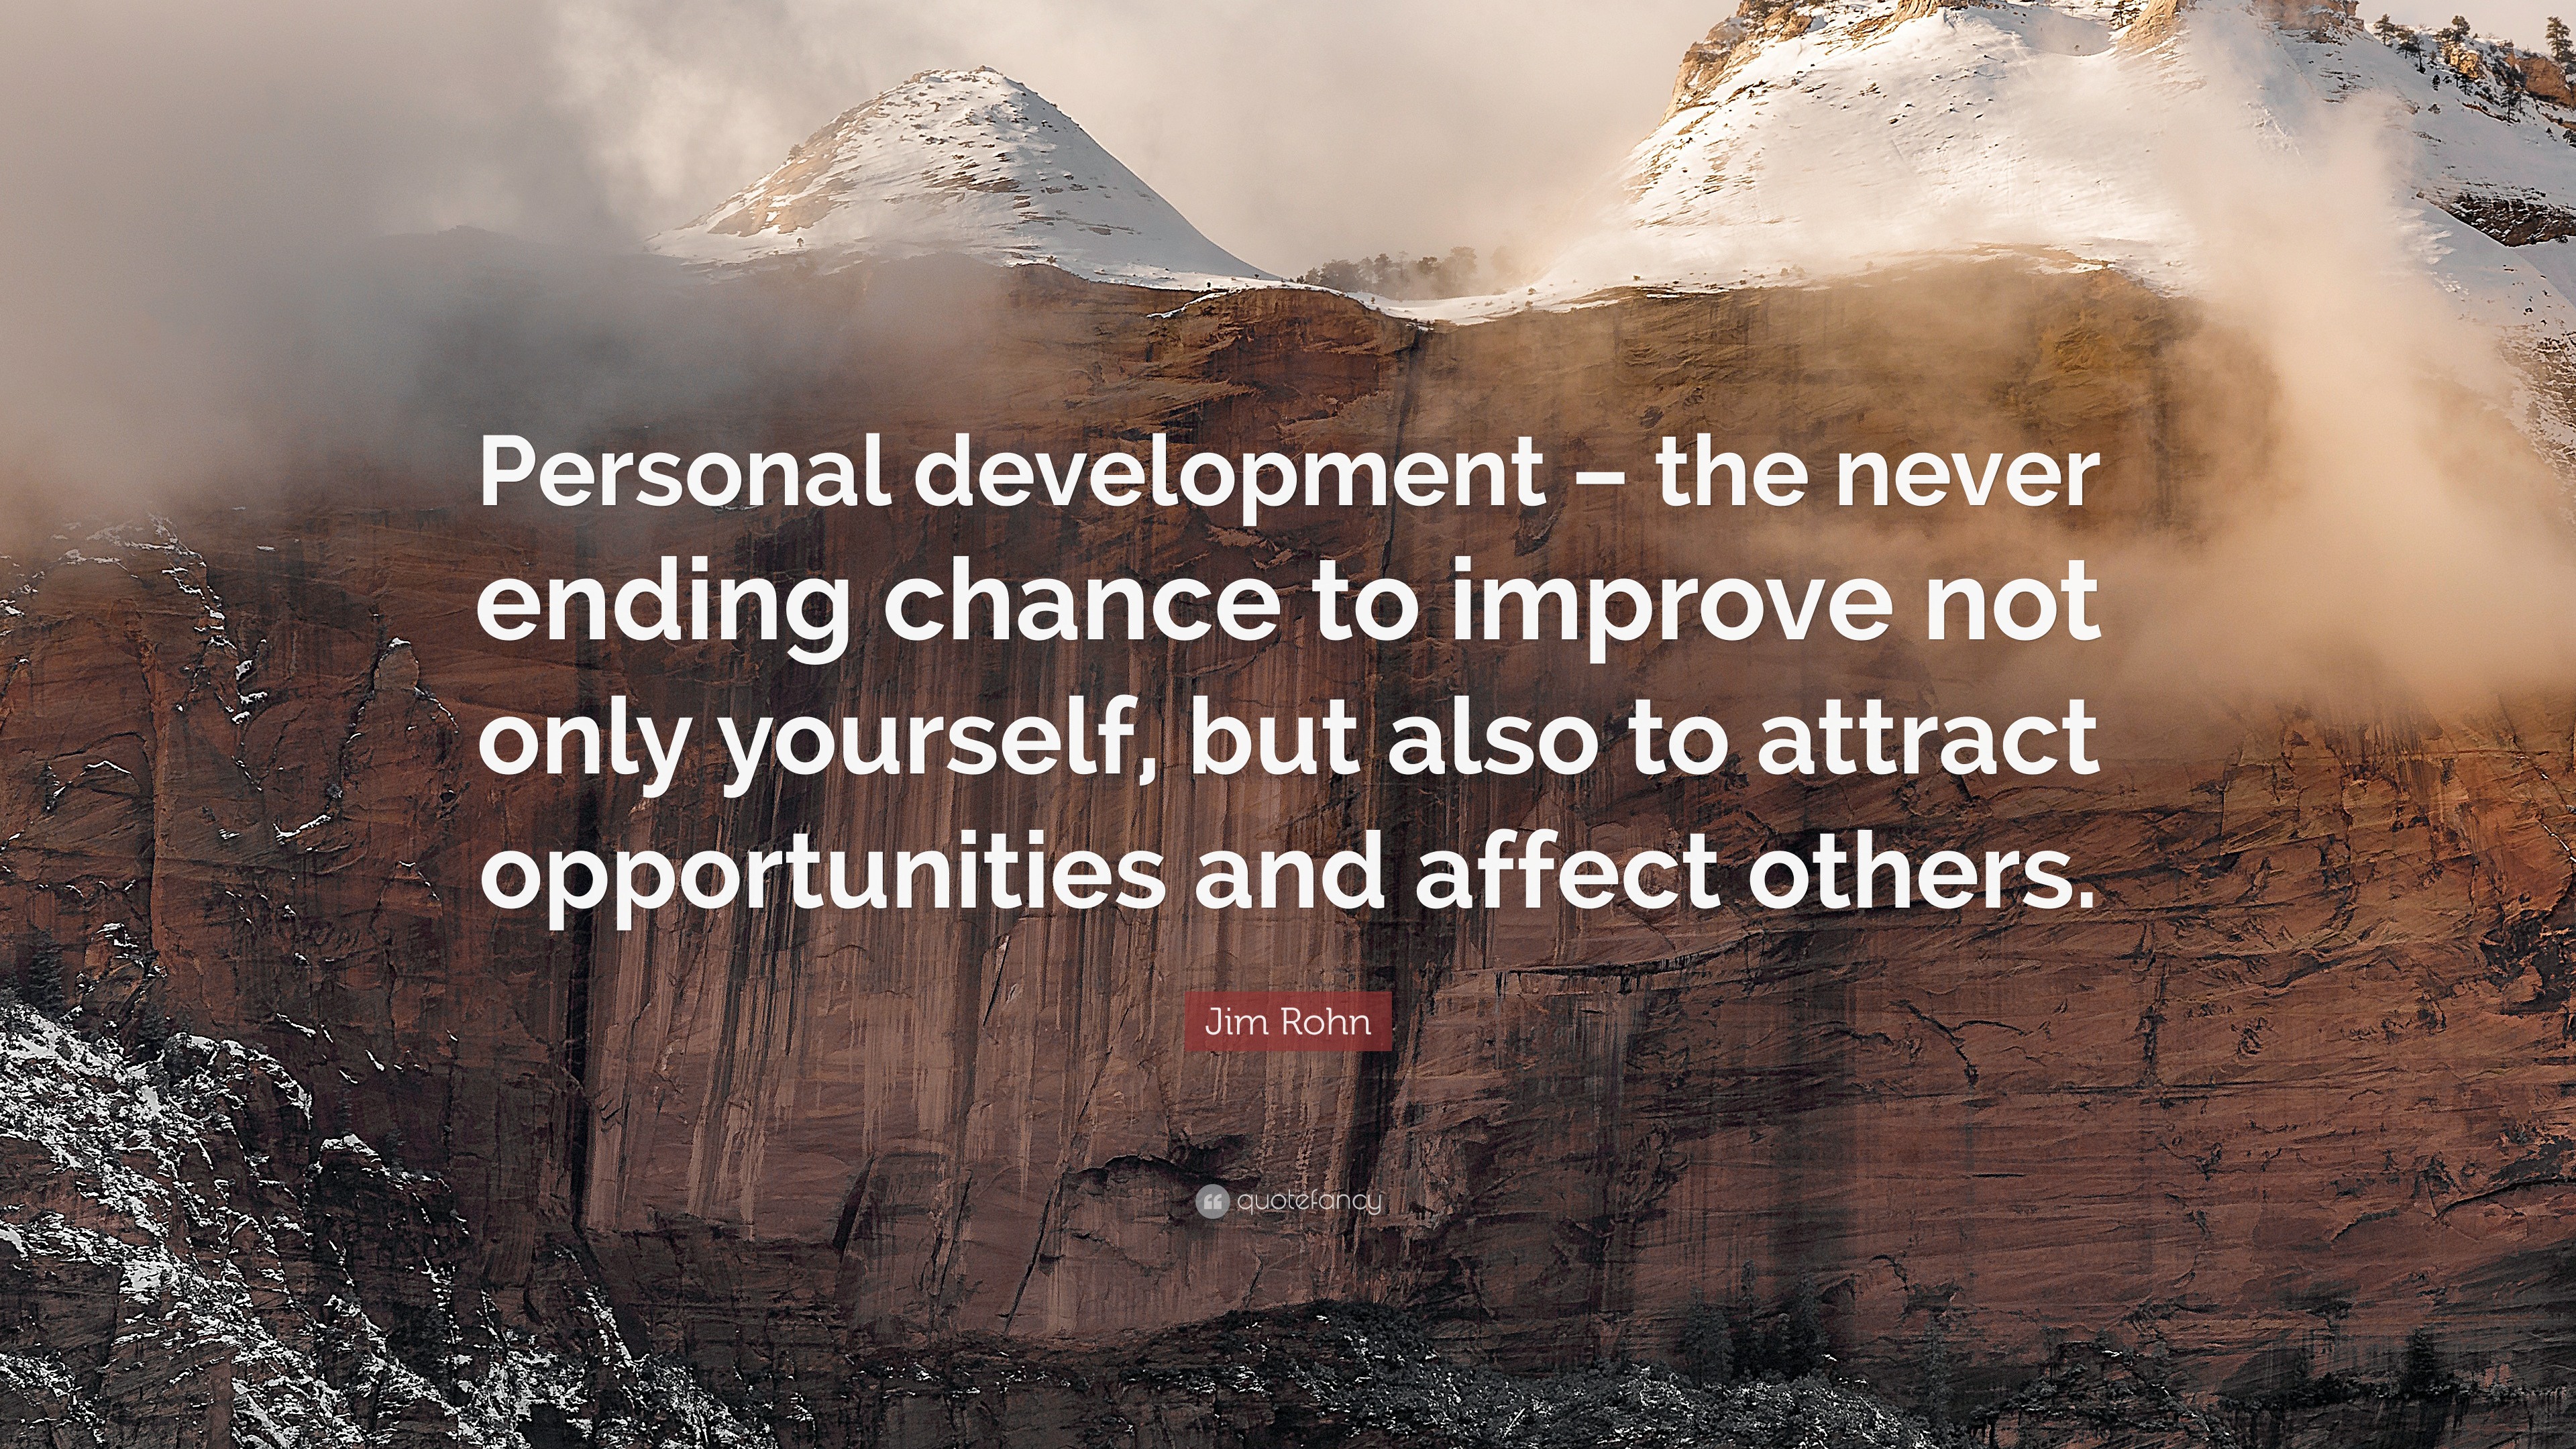 Jim Rohn Quote “Personal development – the never ending chance to improve not only